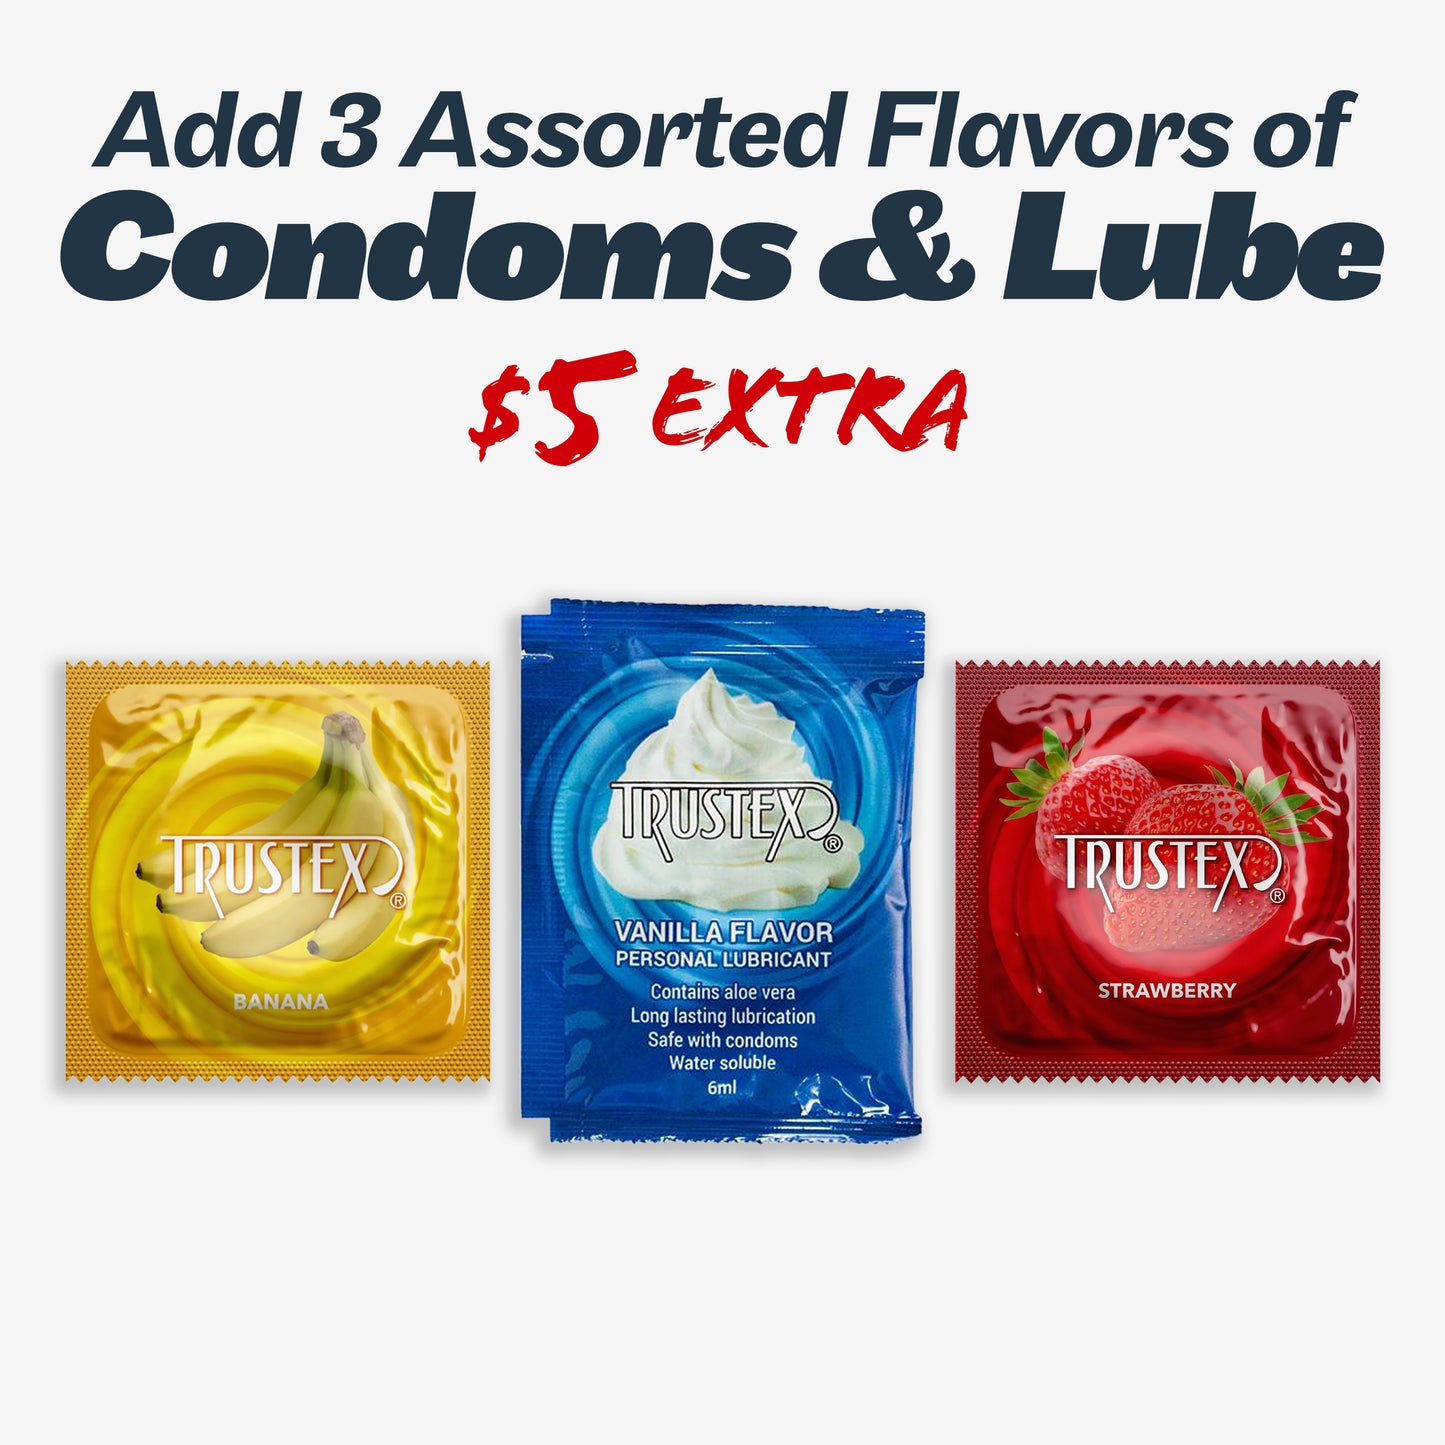 Add flavored condoms and lube for $5 extra!